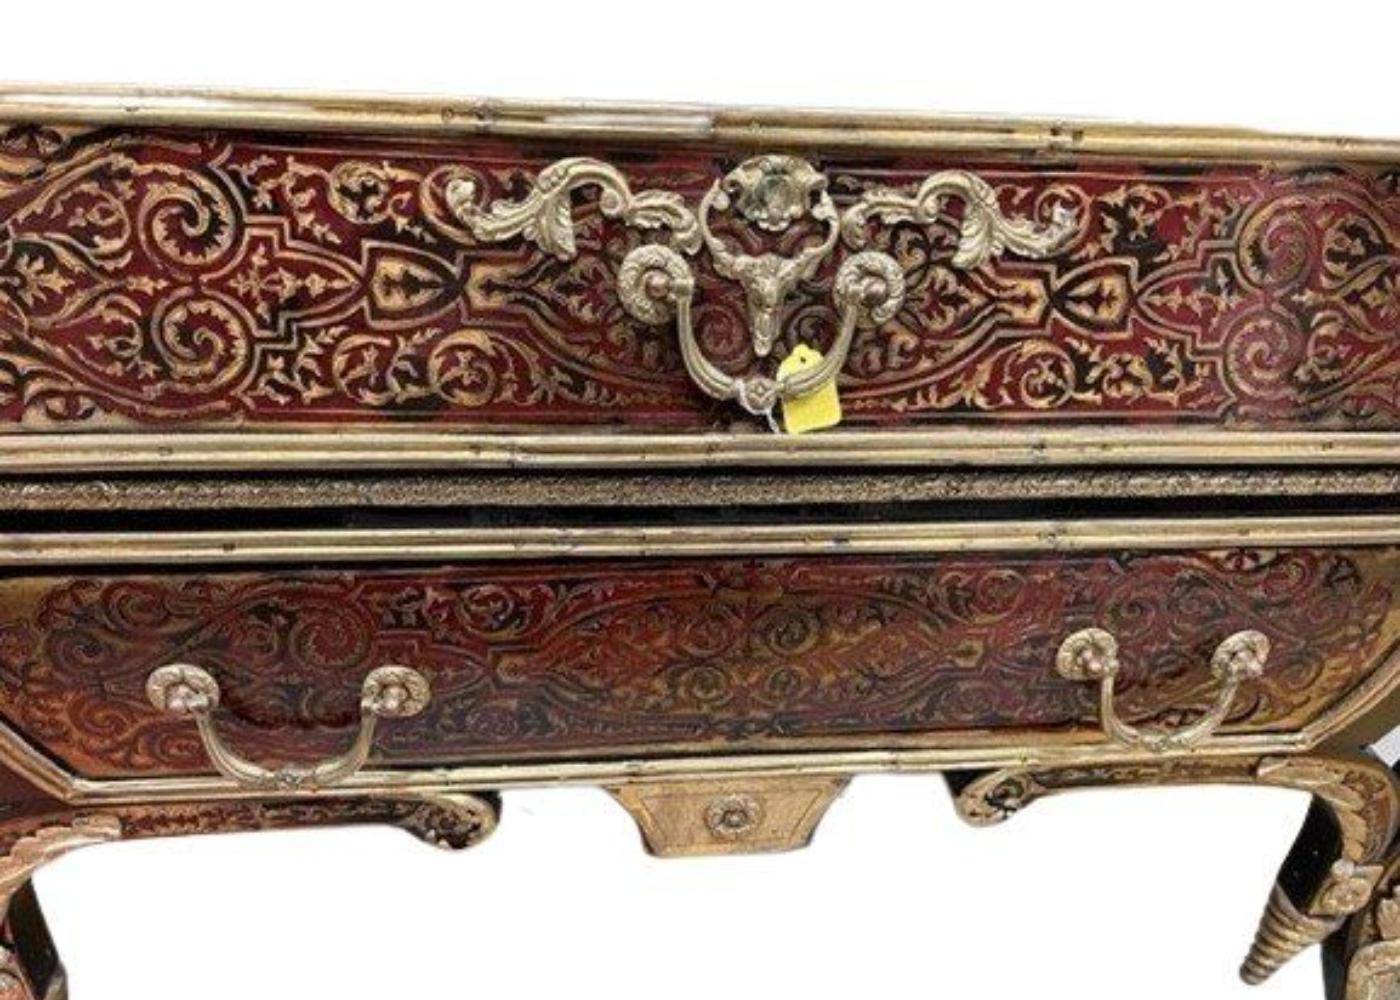 Louis XV French Gilt Bronze-Mounted Tortoiseshell Boulle Commode/Drawer In Good Condition For Sale In Newmanstown, PA